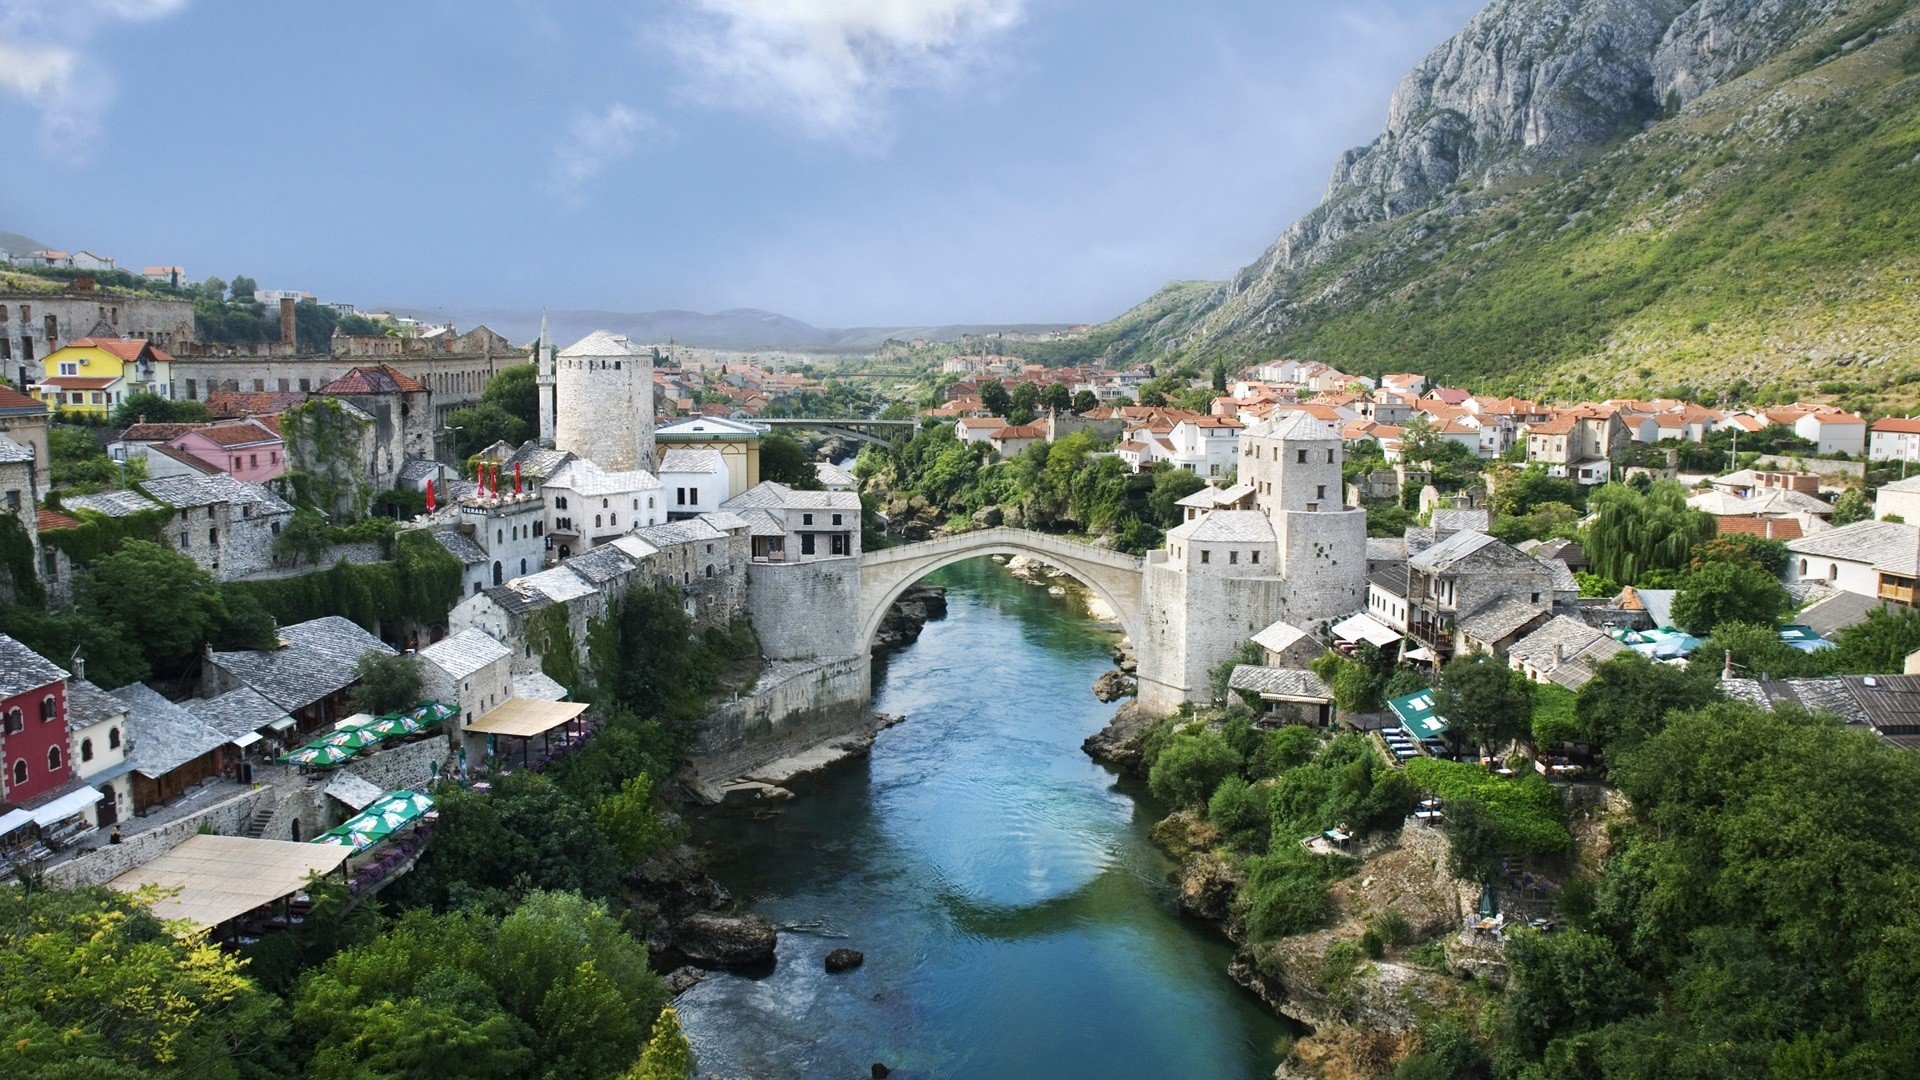 landscapes, Nature, Bridges, Towns, Mostar, Rivers, Bosnia, And, Herzegovina, Townscape, Natural, Scenery, Town Wallpaper